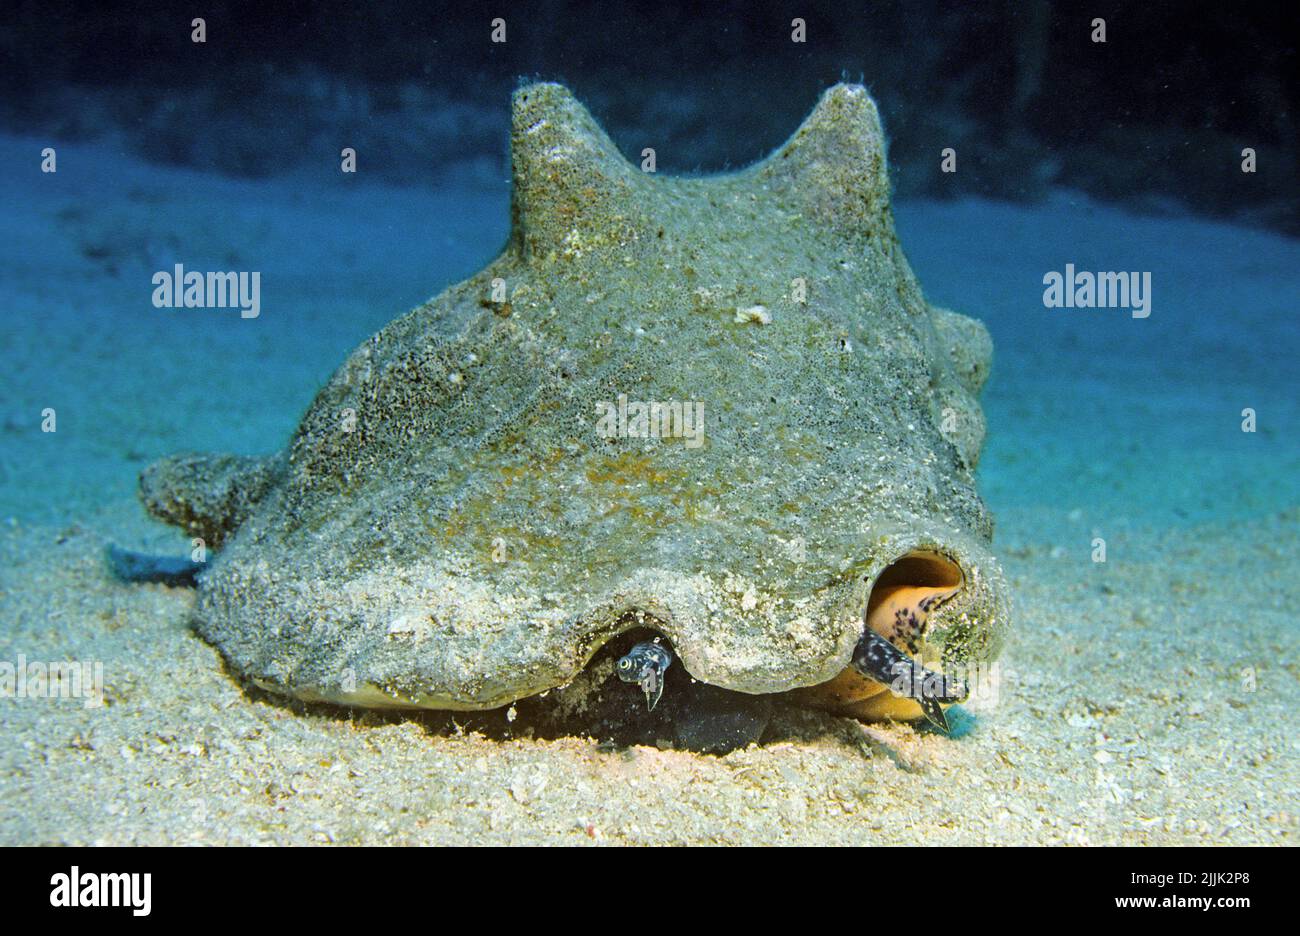 Queen conch or Conch shell (Strombus gigas) on sandy seabed, Curacao, Netherlands Antilles, Caribbean Stock Photo